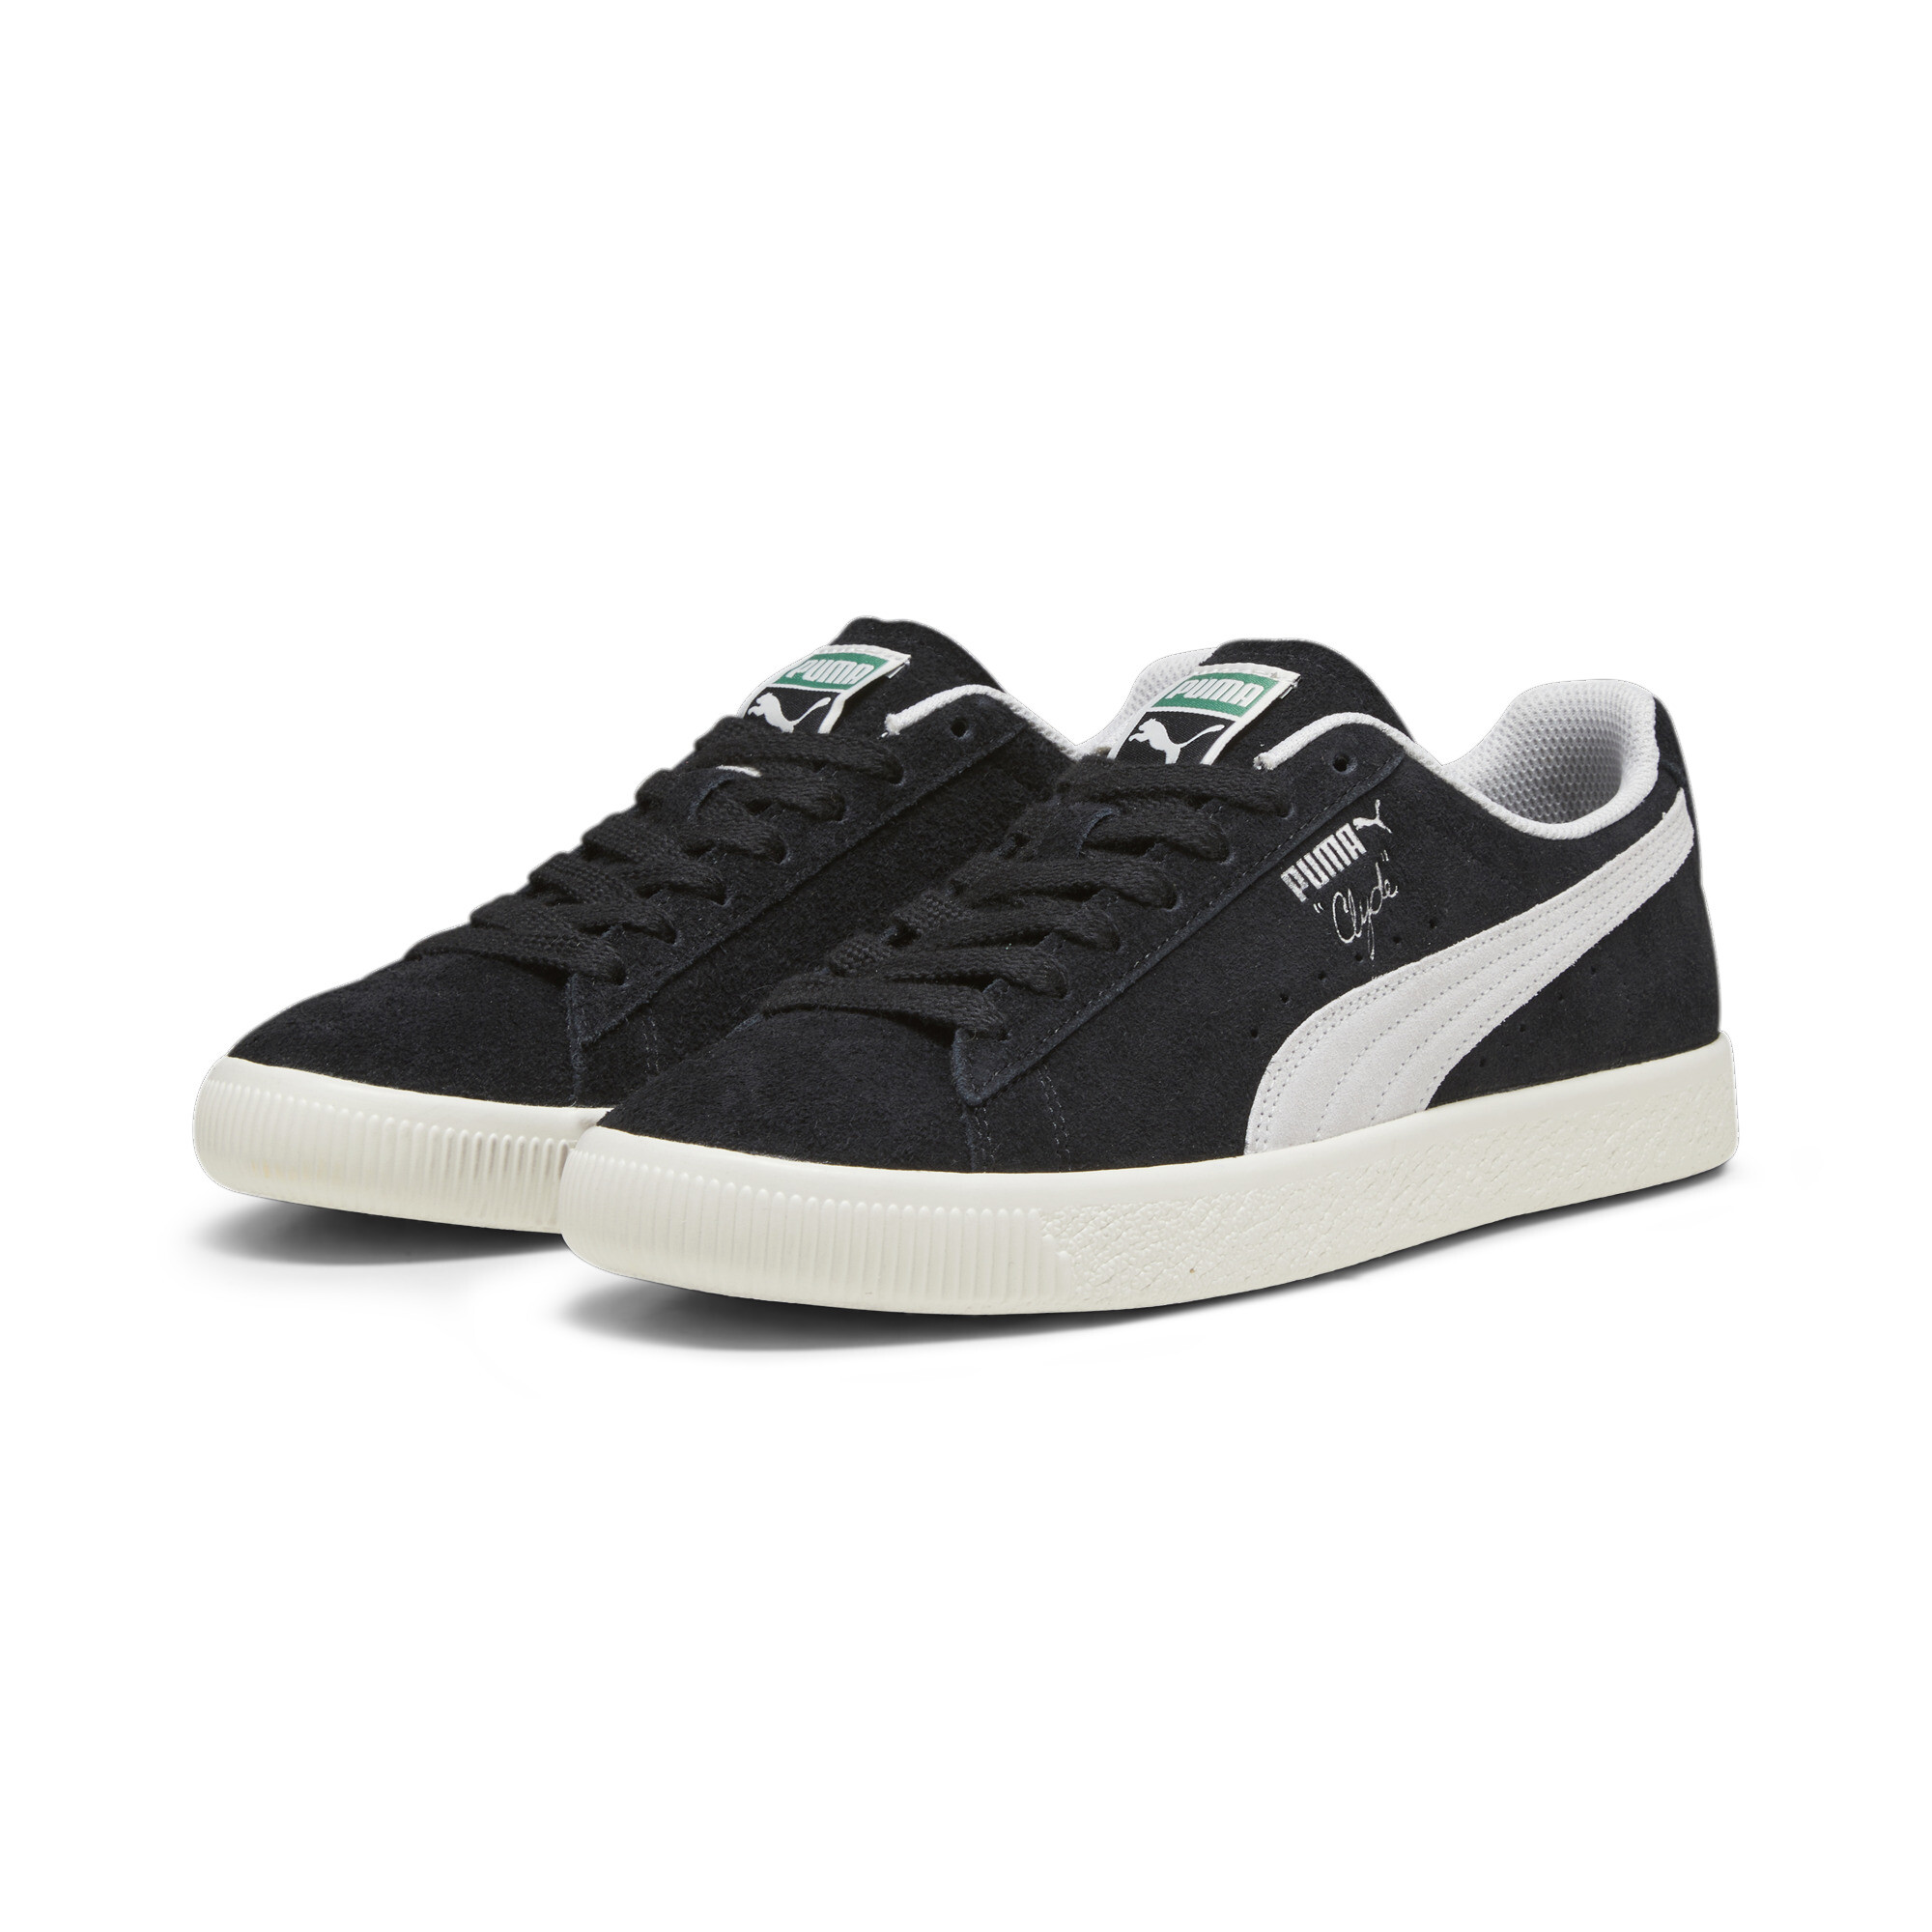 Men's PUMA Clyde Hairy Suede Sneakers In Black, Size EU 45